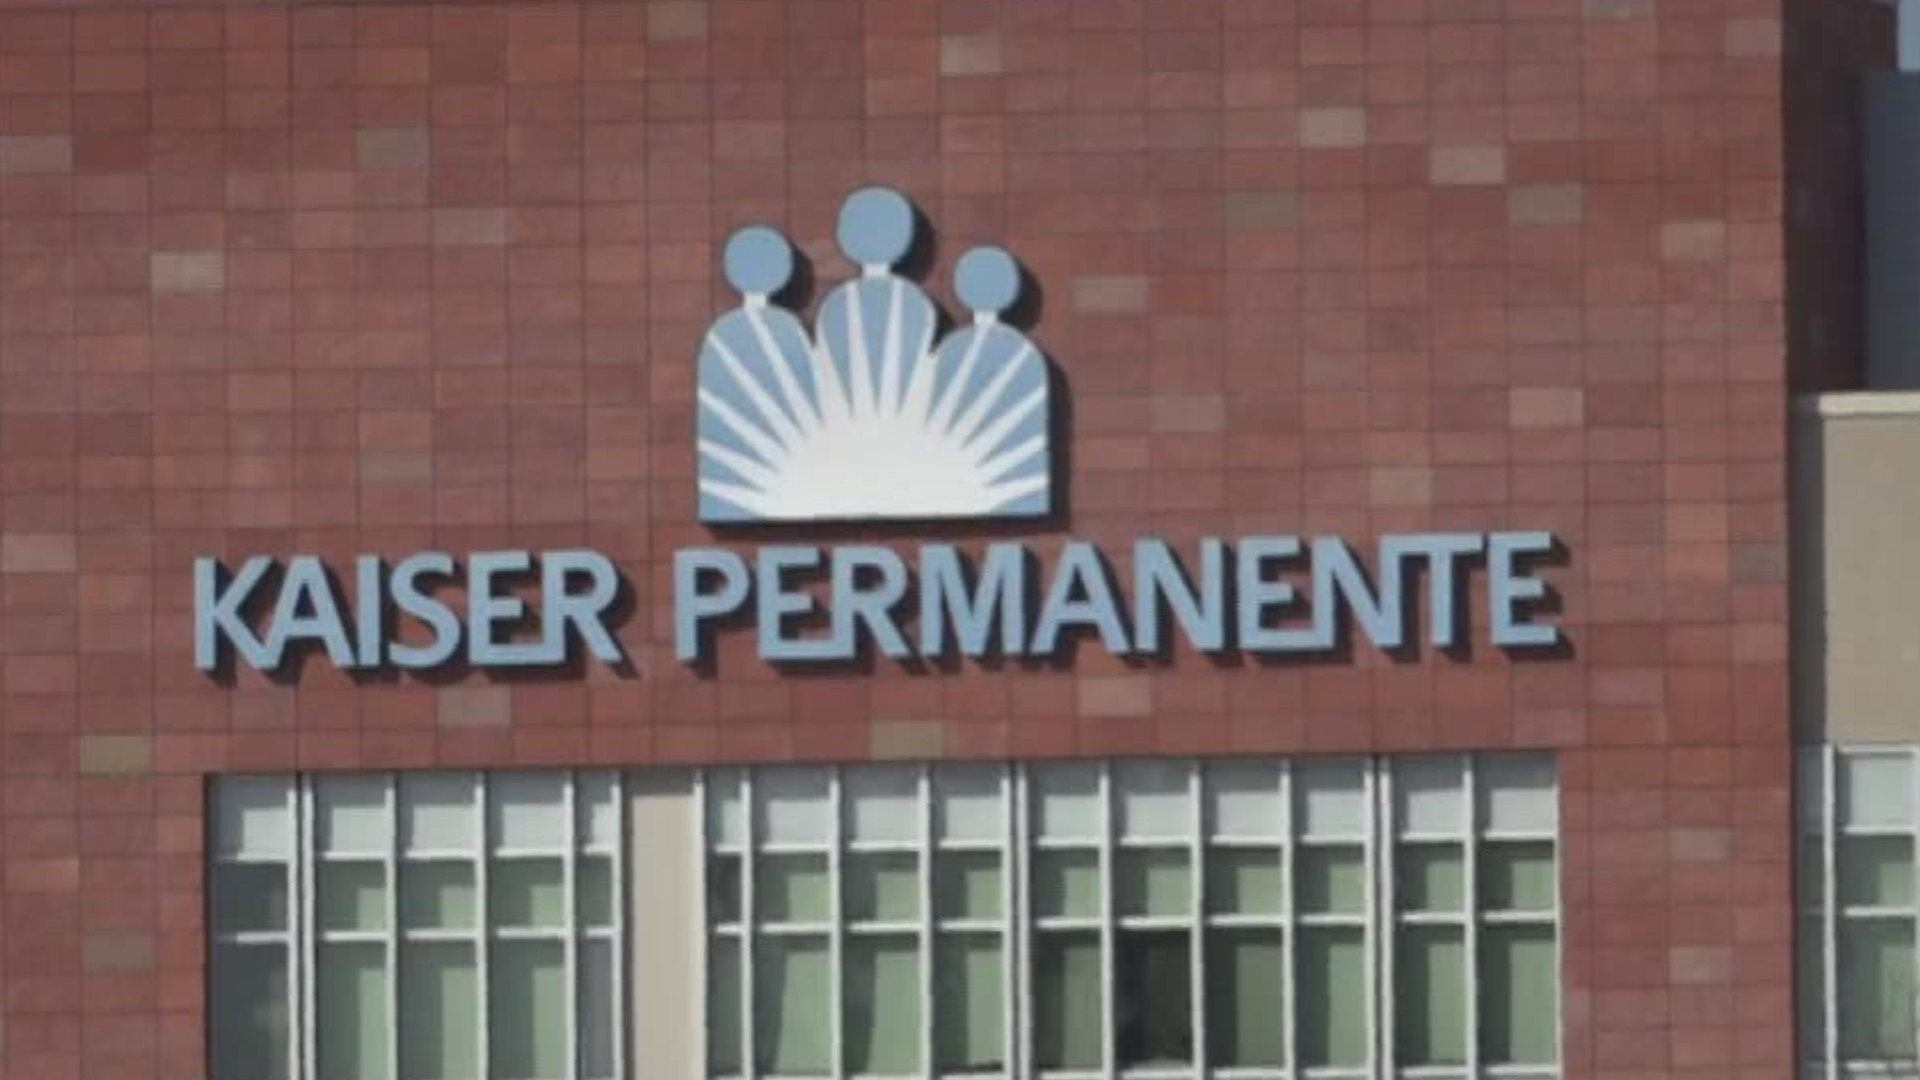 “We are committed to meeting the health care needs of greater Sacramento and its surrounding communities today and well into the future,” a Kaiser spokesperson said.